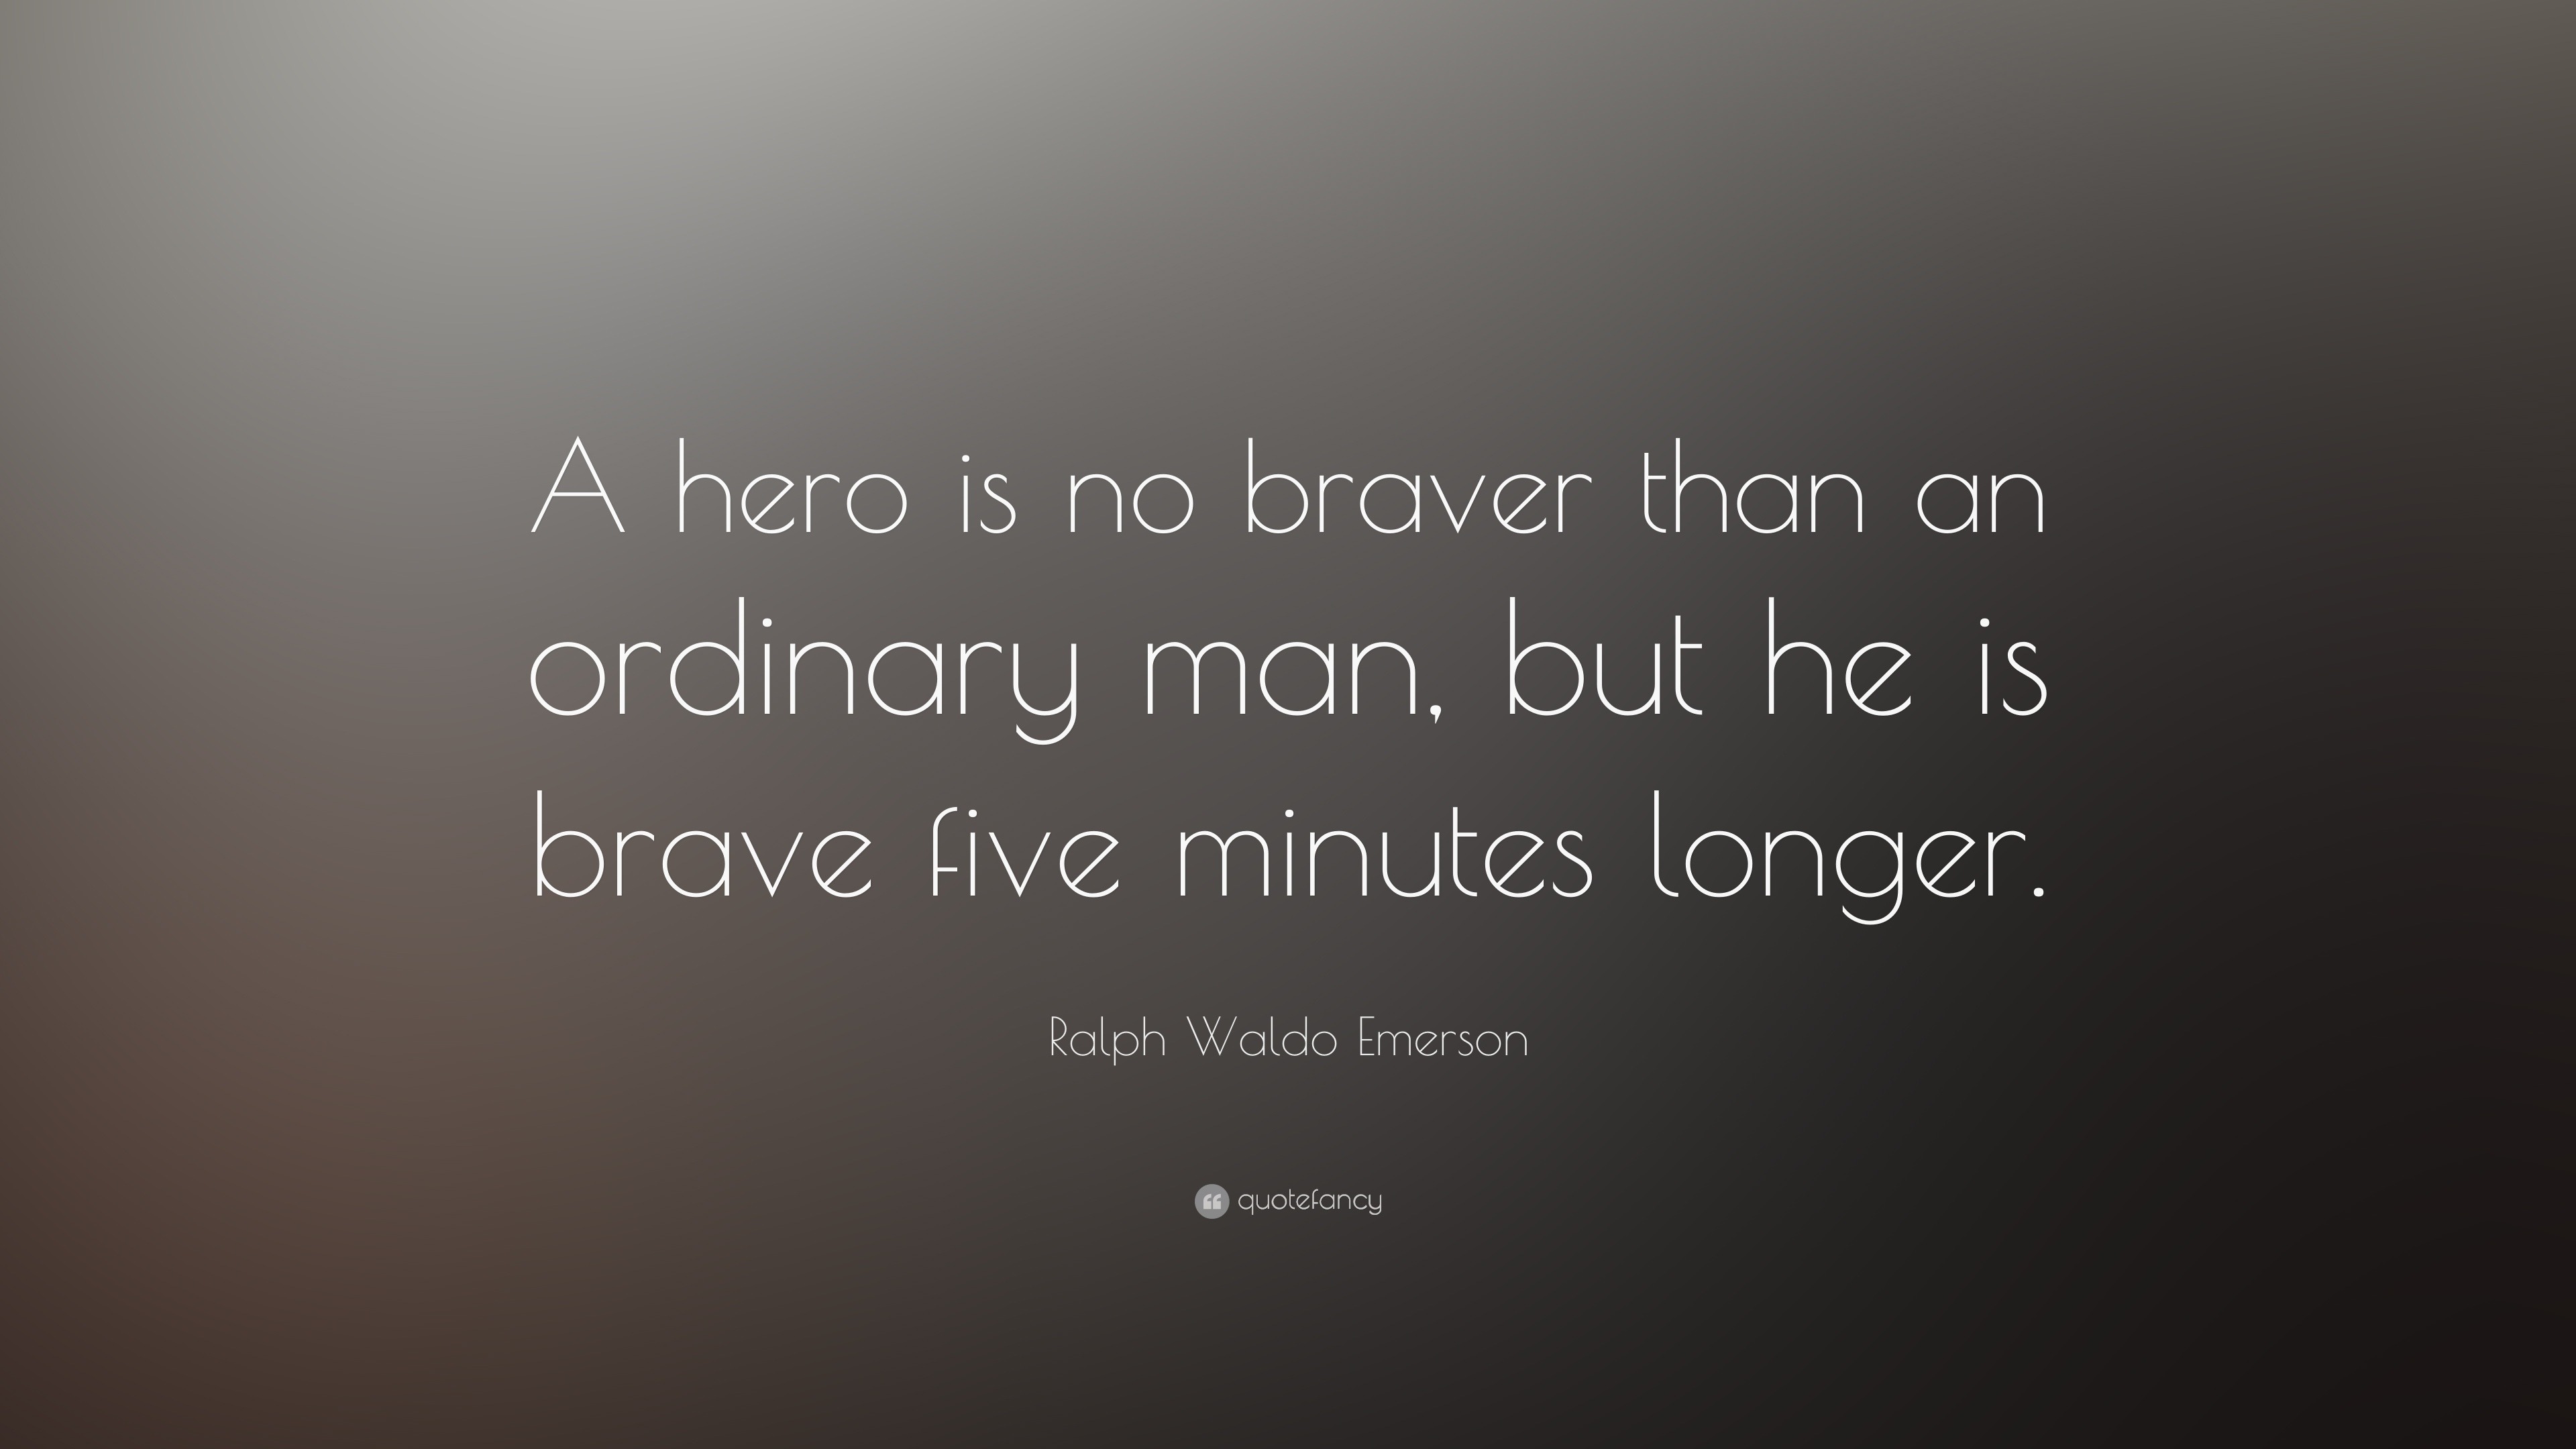 A hero is no braver than an ordinary man, but he is brave five minutes long...